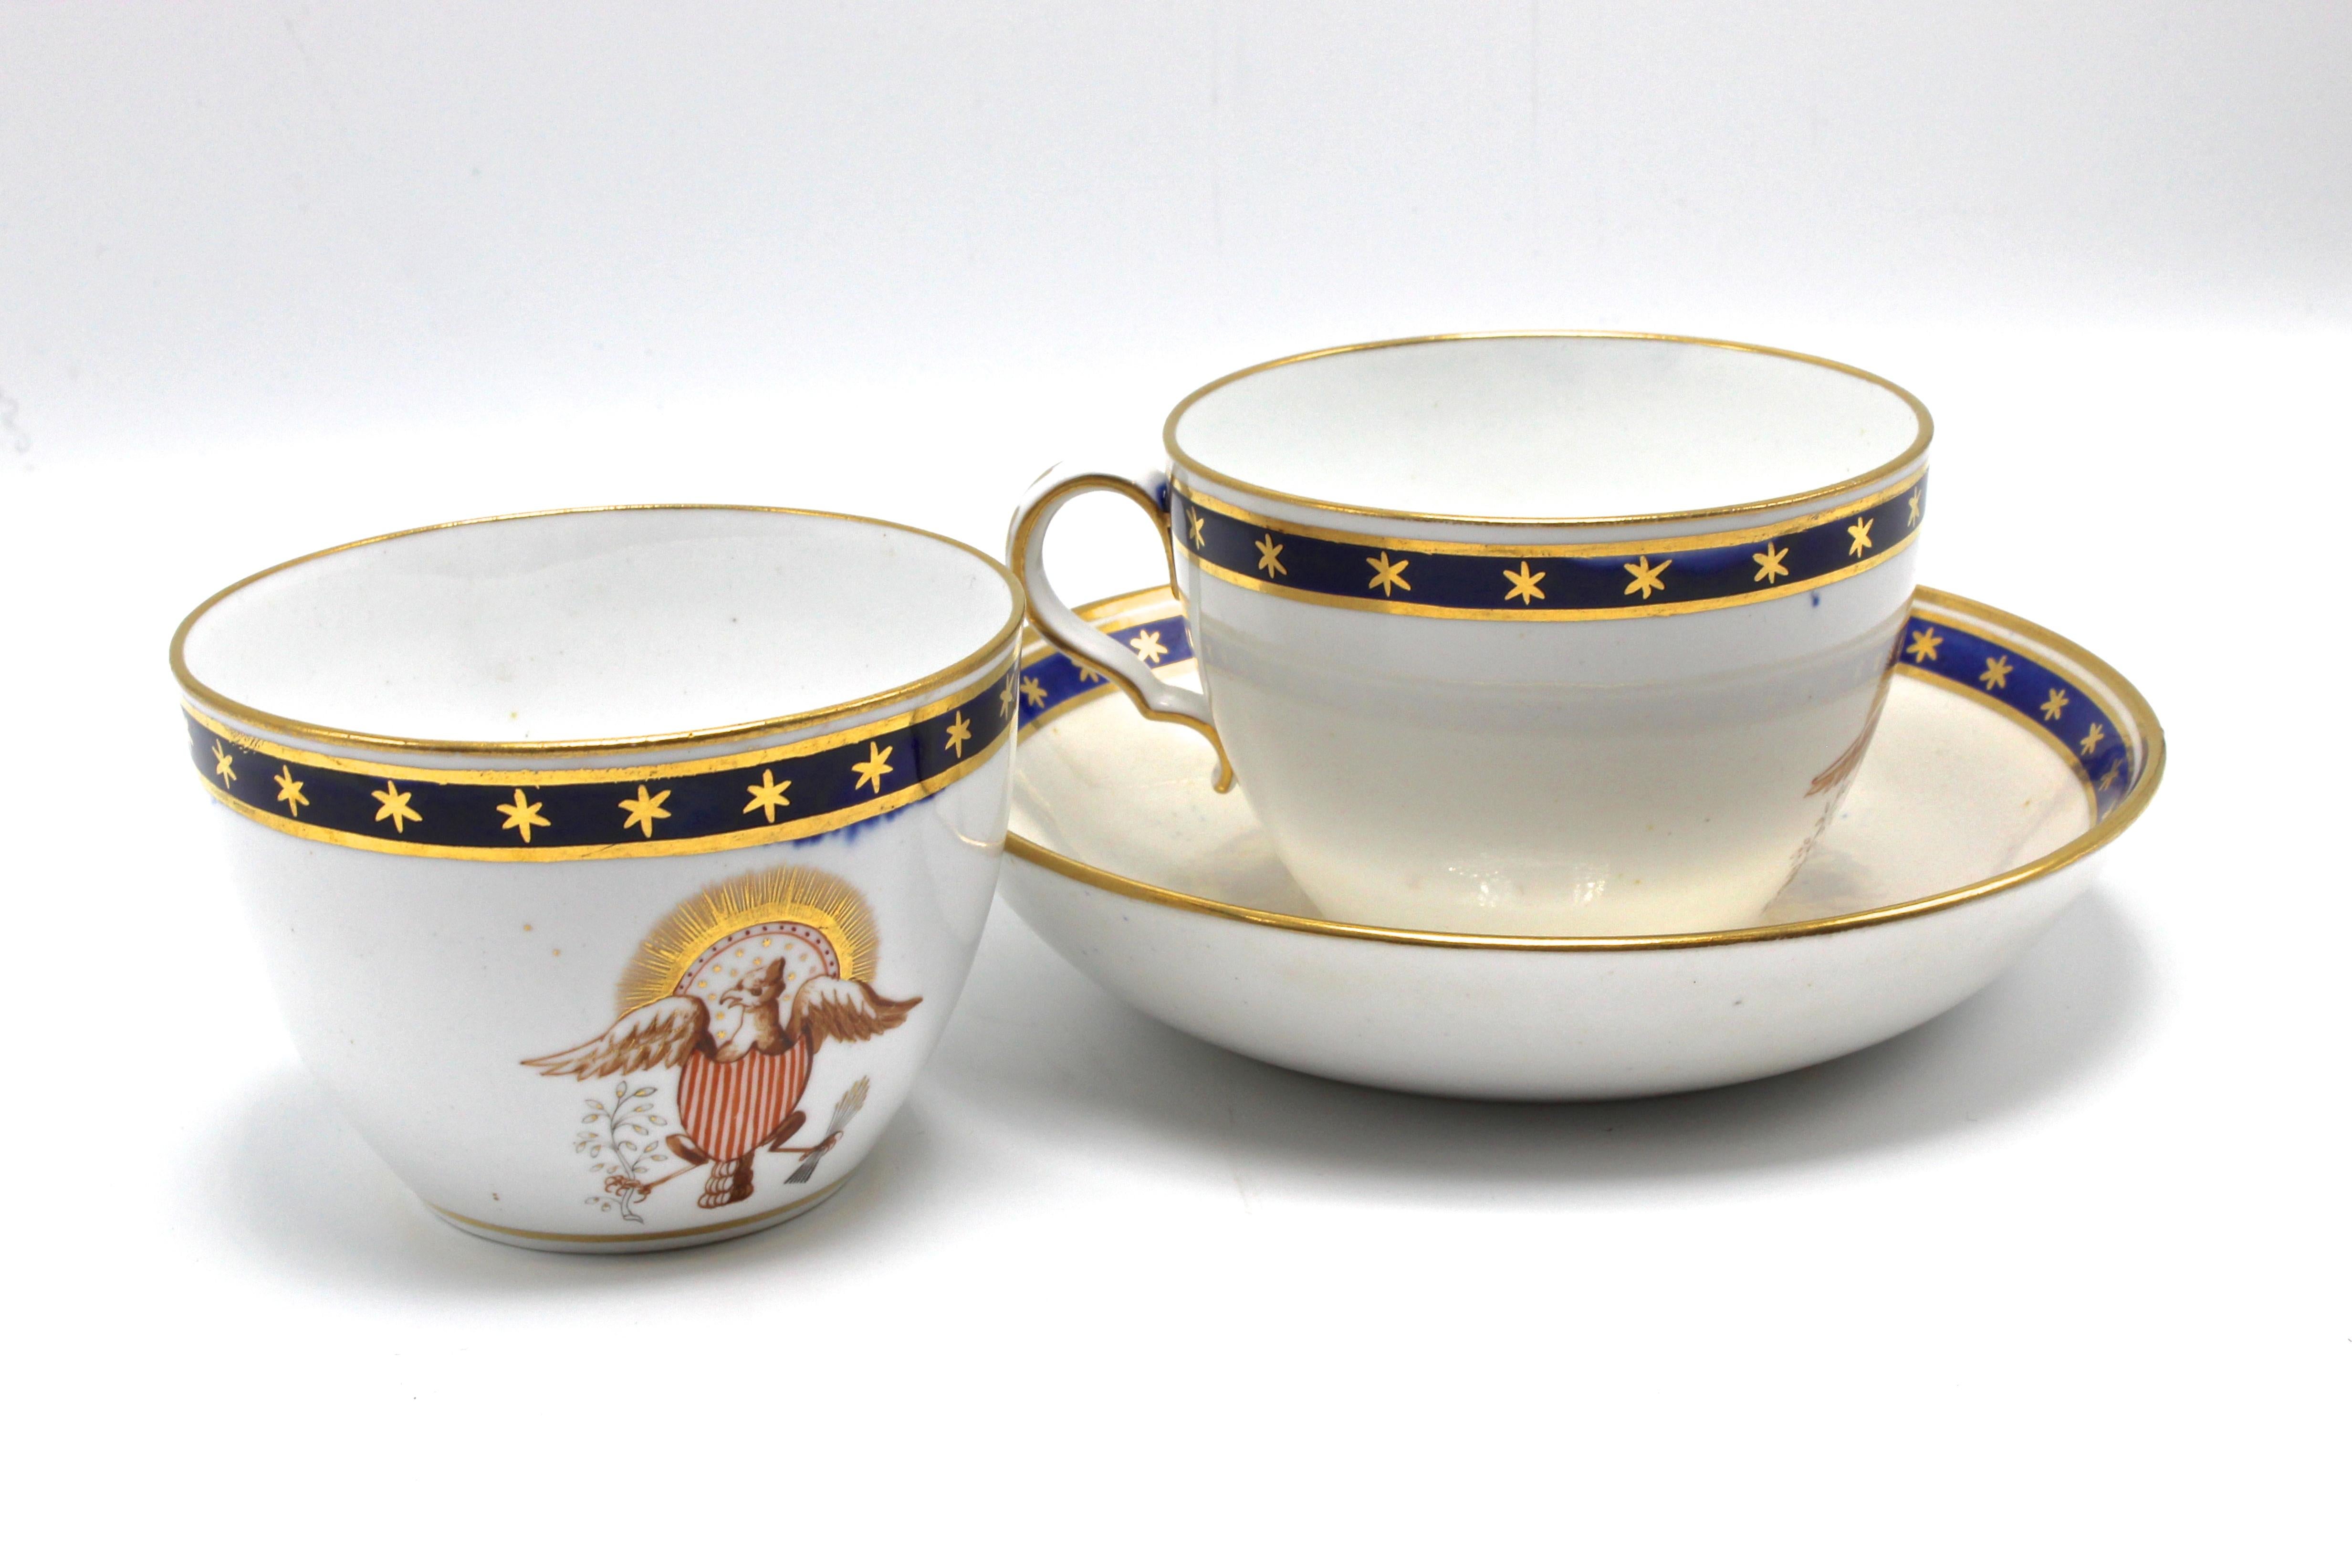 Mid-19th Century Pair of Patriotic American Eagle Teacups and Saucers, Circa 1840s